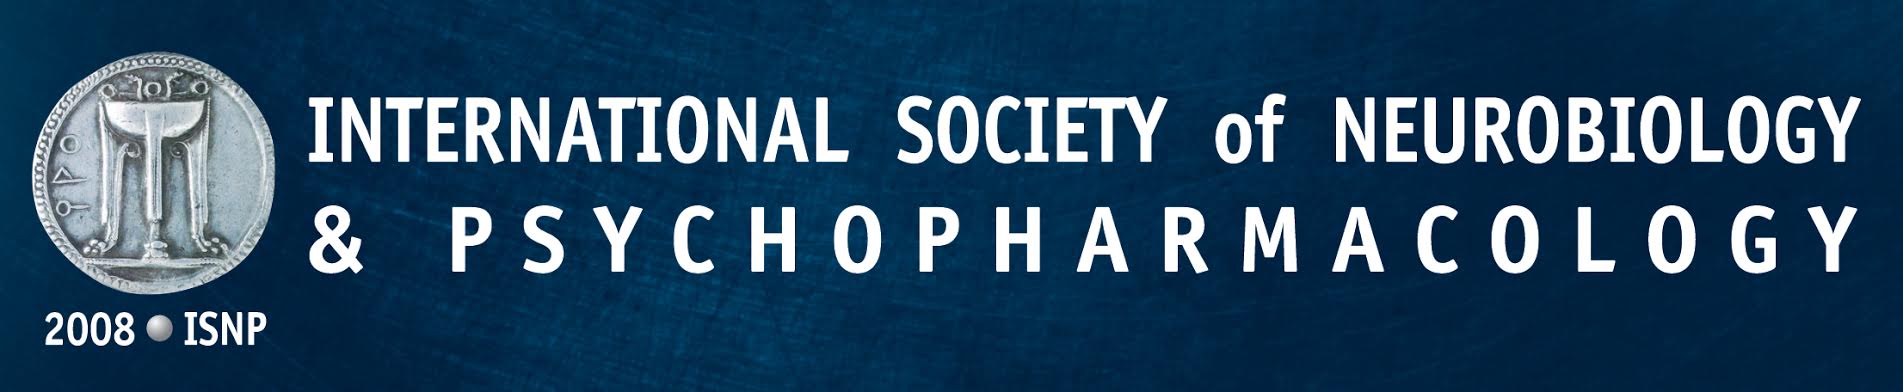 logo for International Society on Neurobiology and Psychopharmacology